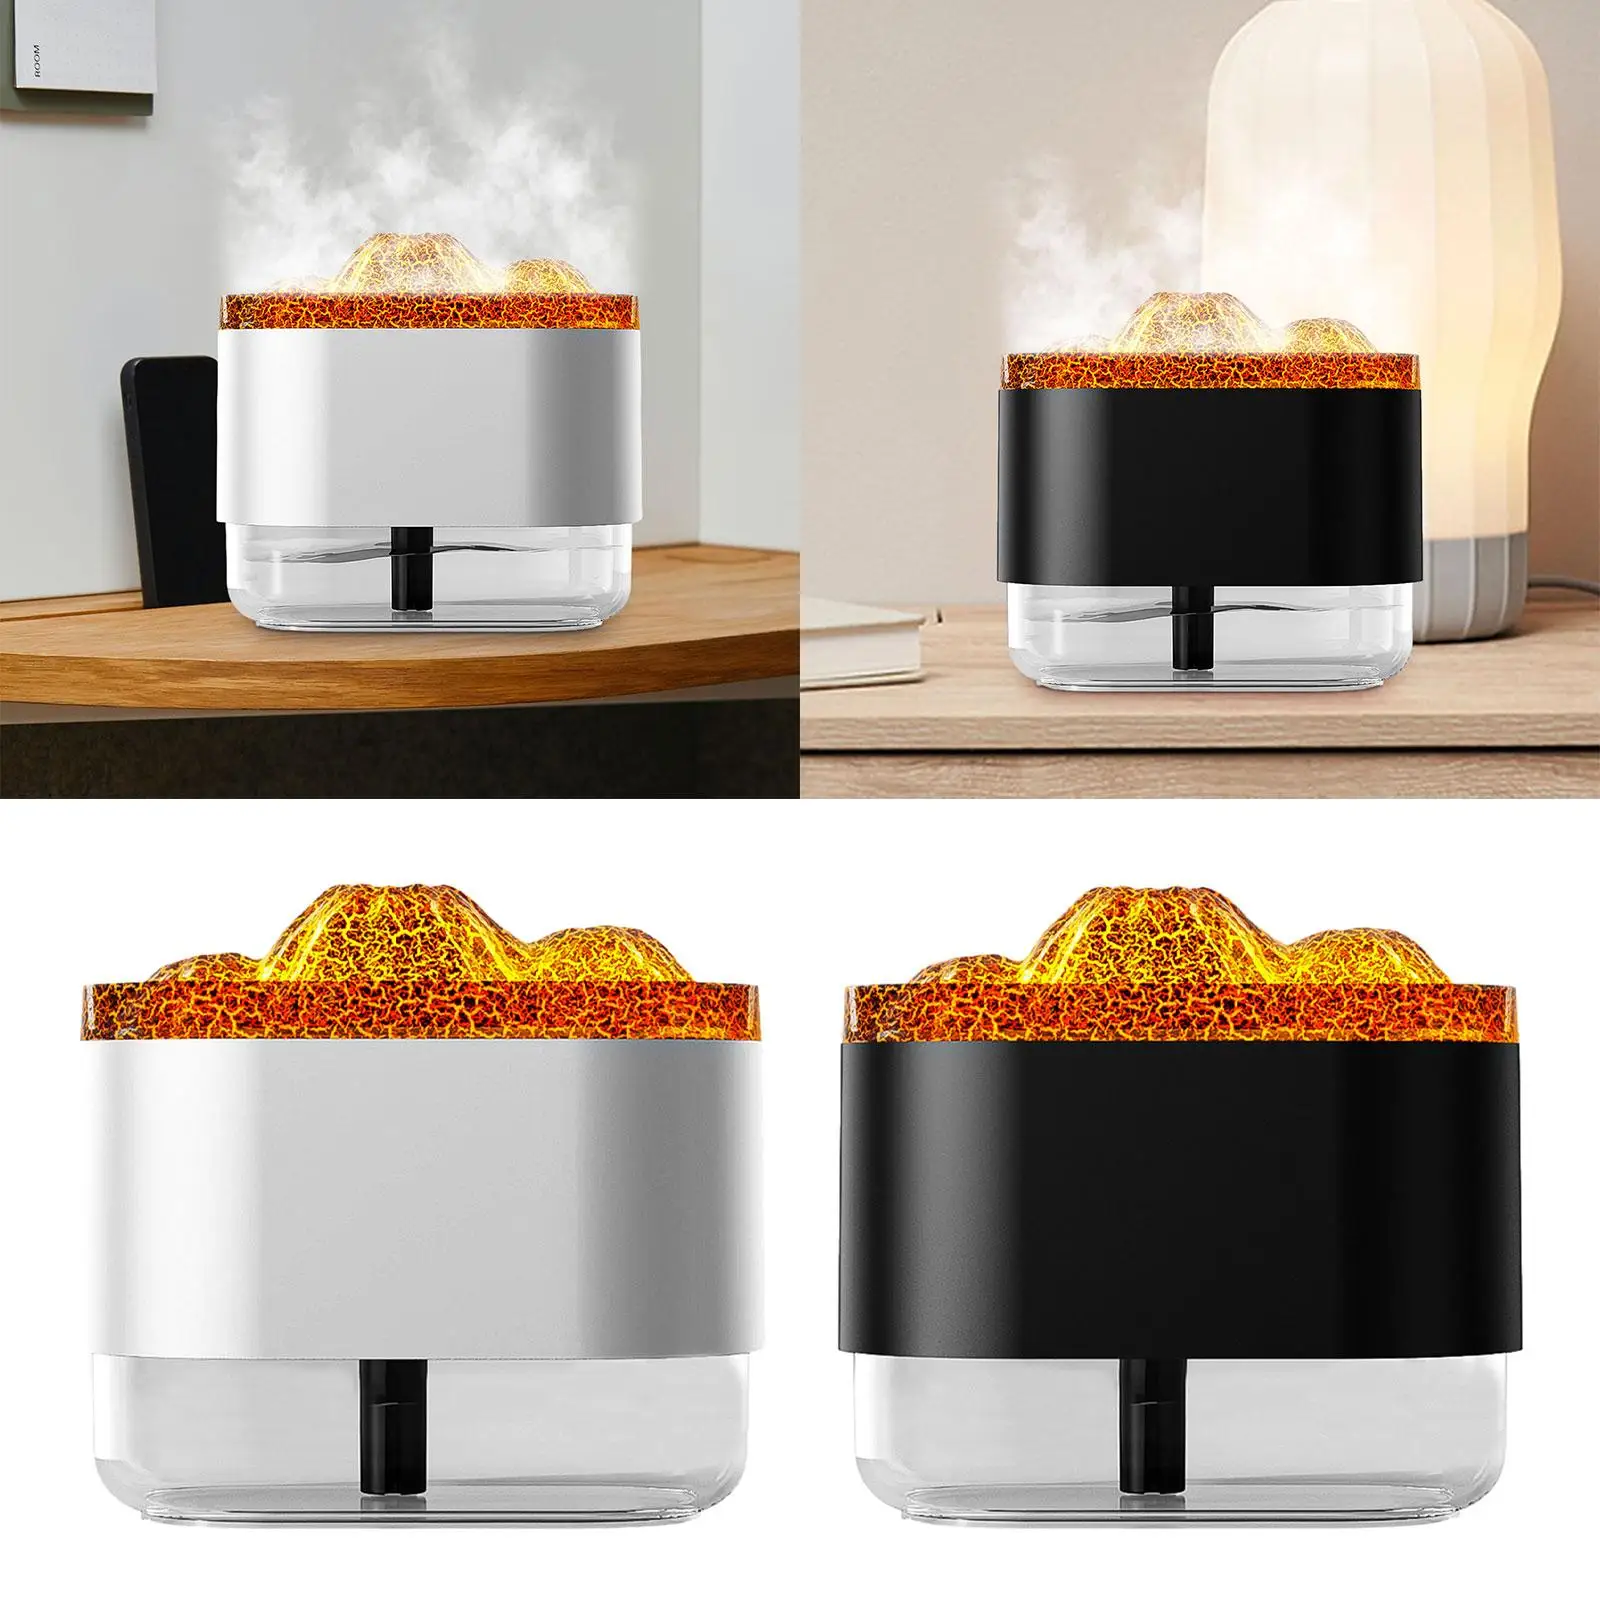 300ml USB Simulated Volcano Bedroom Humidifier Quiet Personal Humidifier Portable with Night Light for Daily Use Multifunctional